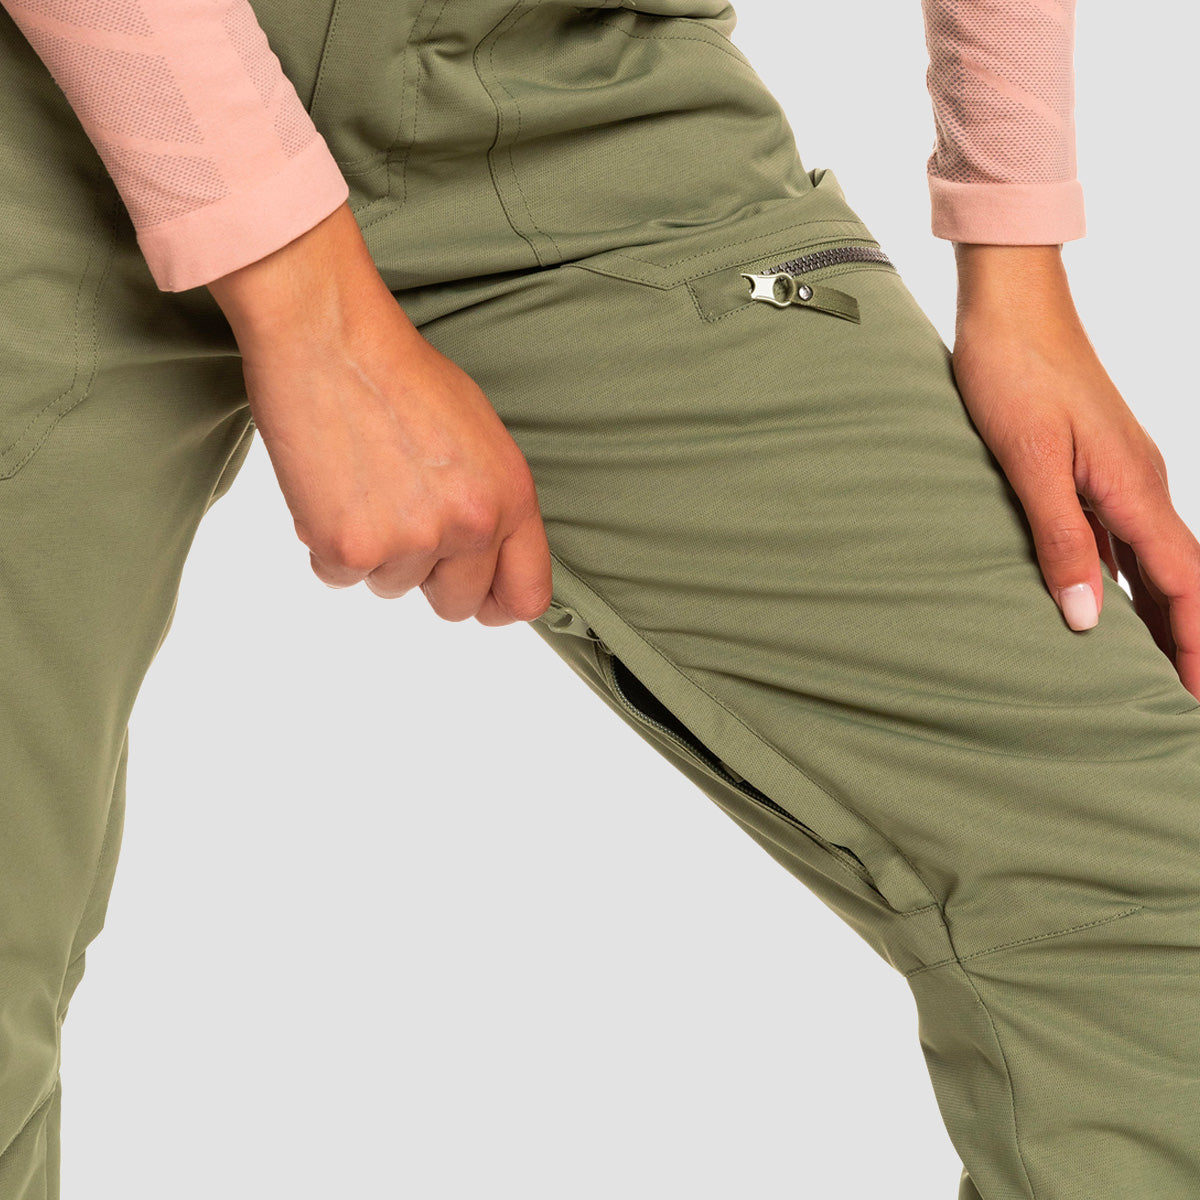 Part of the Treeline Collection, the Nadia Insulated Snow Pants